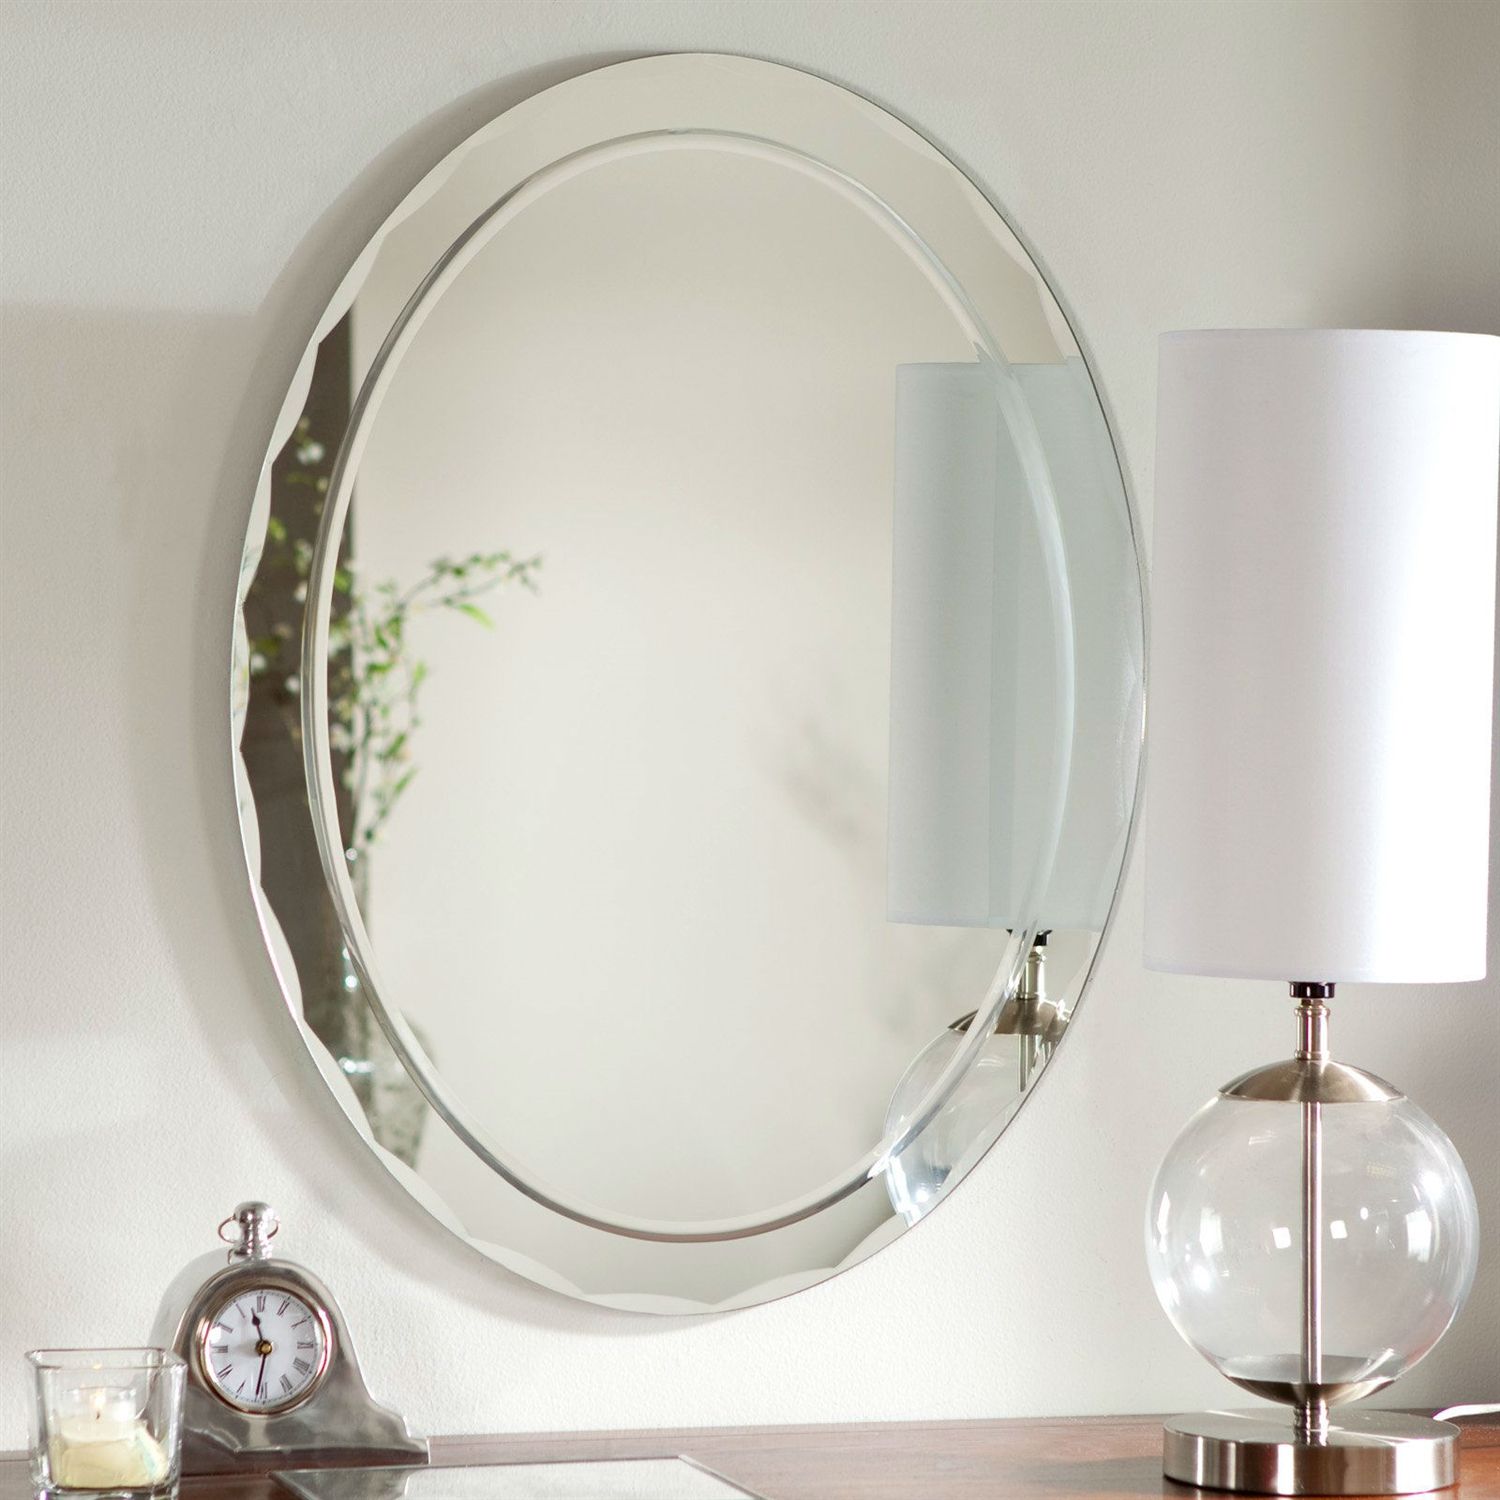 Oval Frameless Bathroom Vanity Wall Mirror With Beveled Edge Scallop Border Throughout Round Scalloped Edge Wall Mirrors (View 11 of 15)